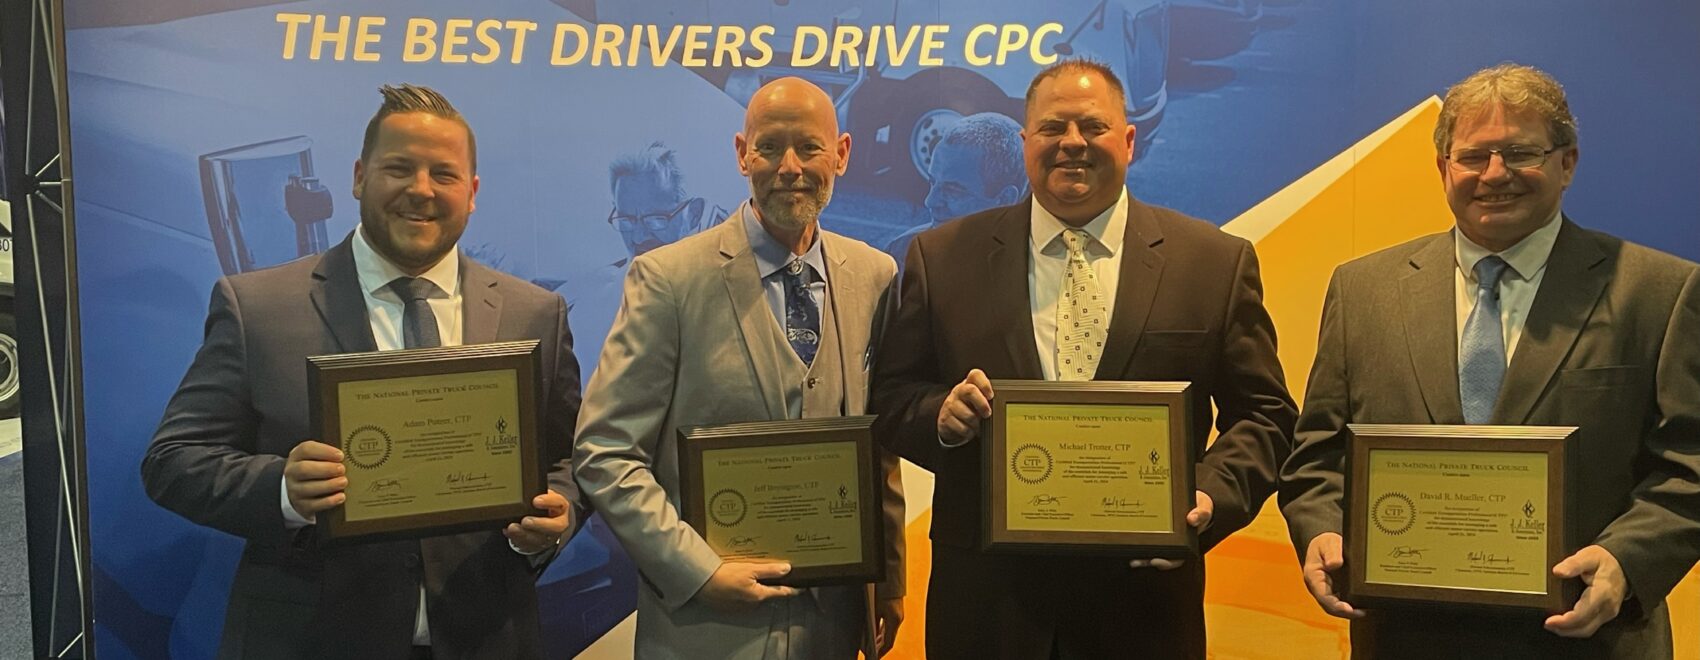 From left: National Sales Director Adam Putzer, Operations Manager Jeff Boyington, Division Manager Mike Trotter and Transportation Manager David Mueller